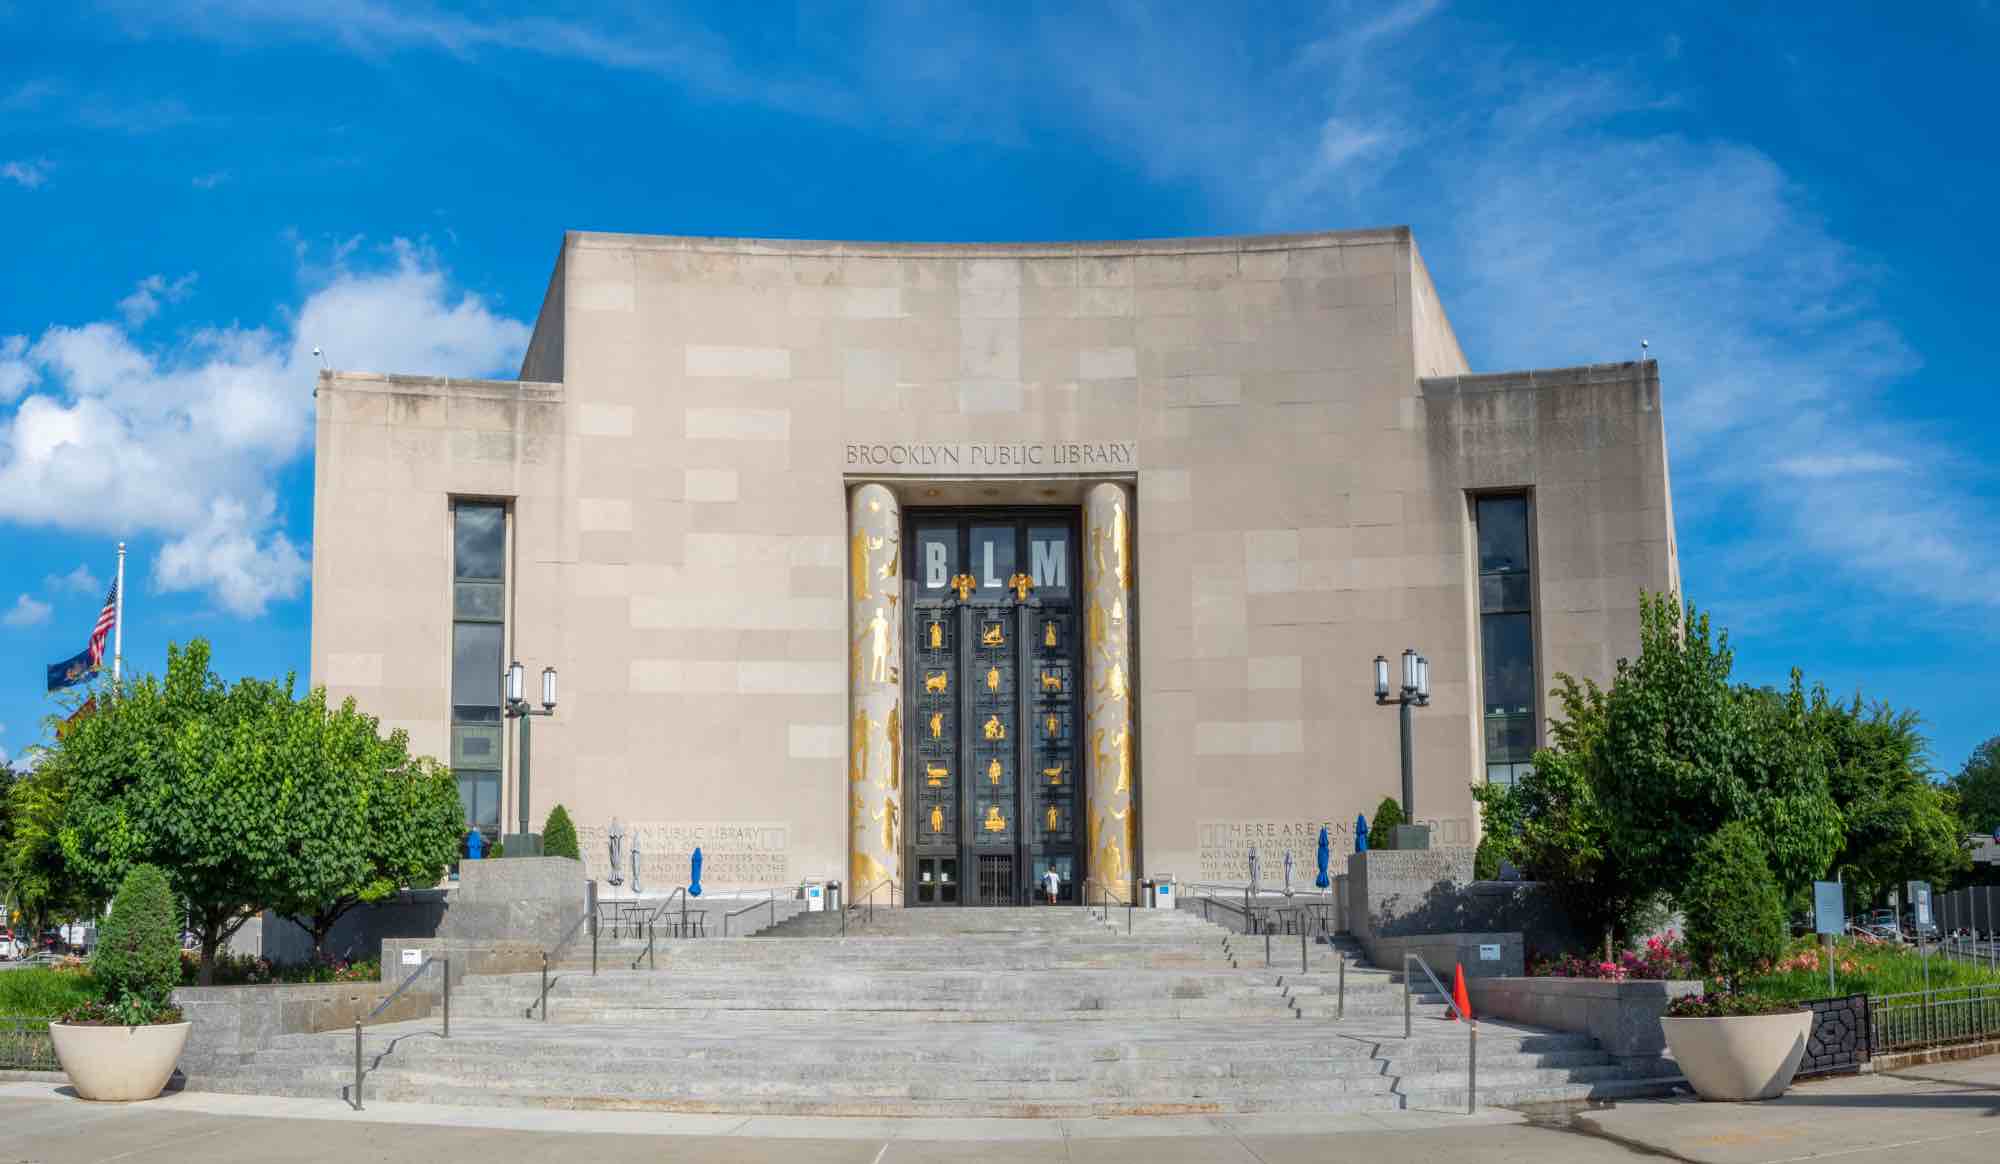 The exterior of Brooklyn Public Library.